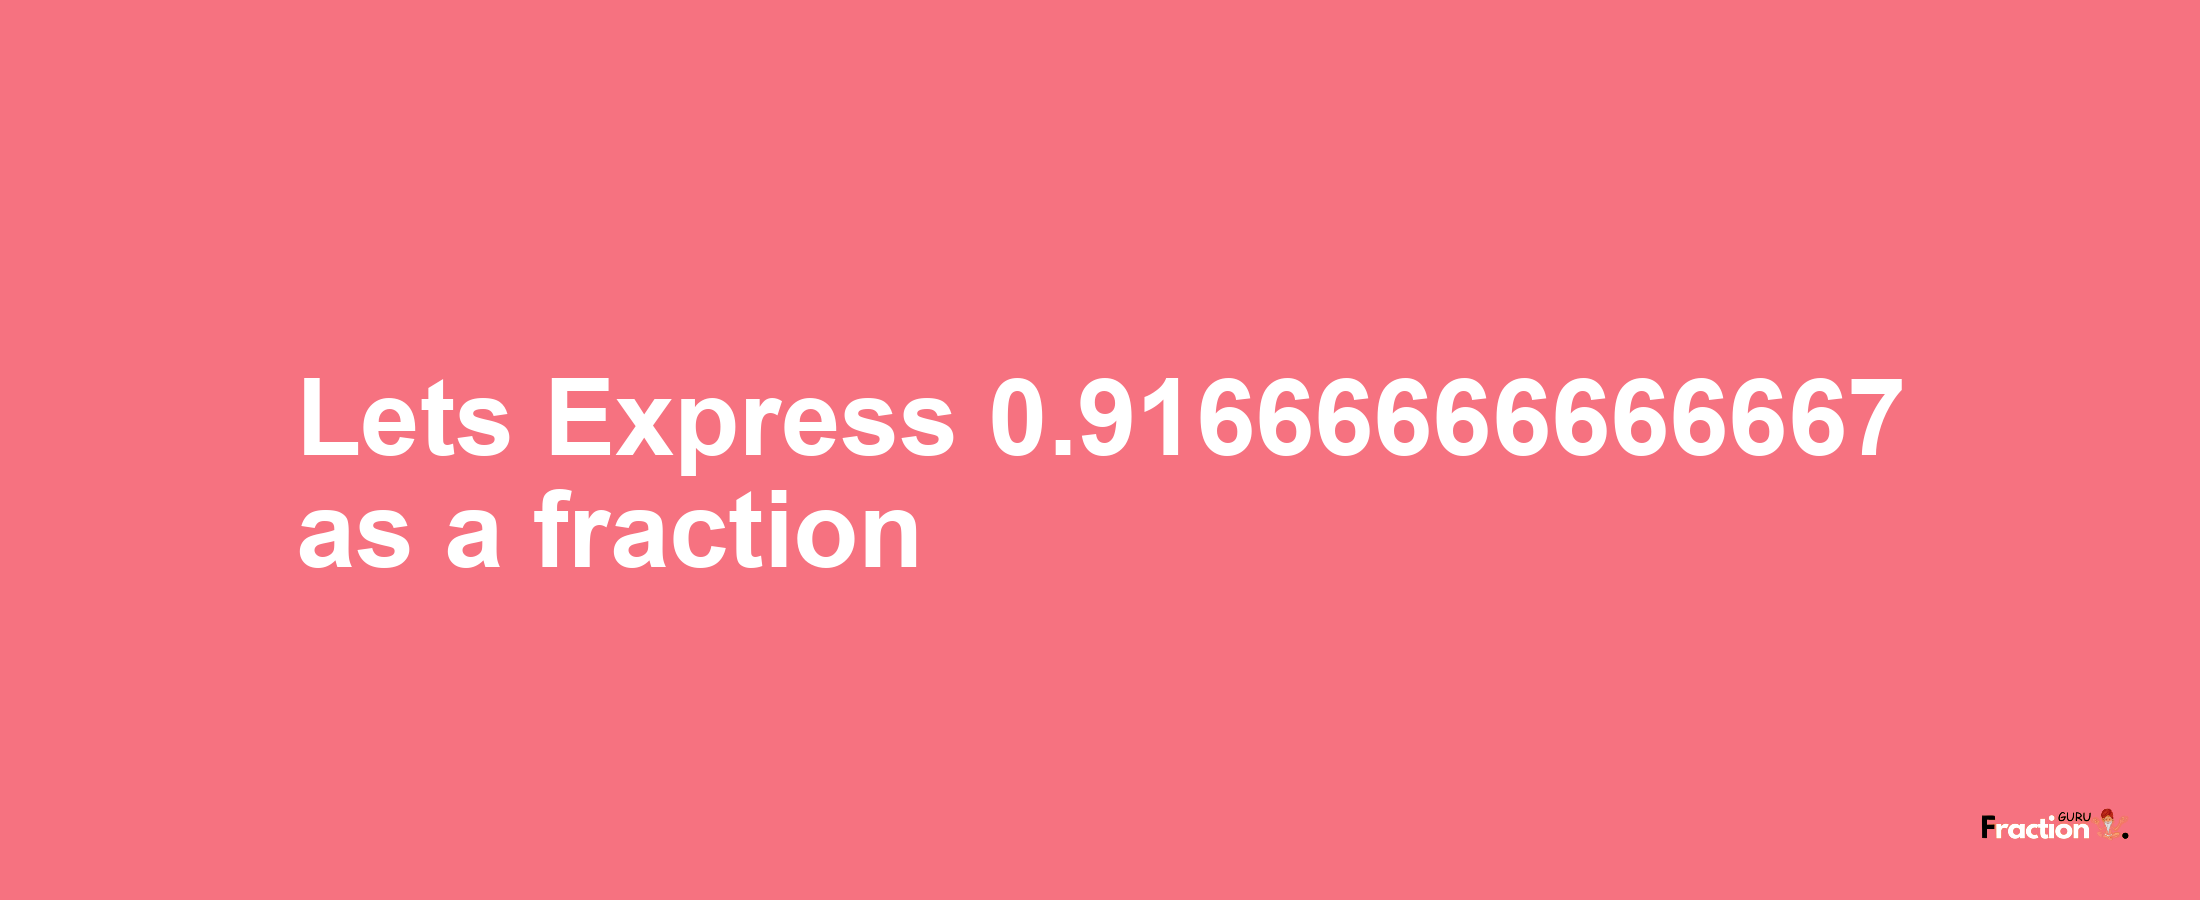 Lets Express 0.91666666666667 as afraction